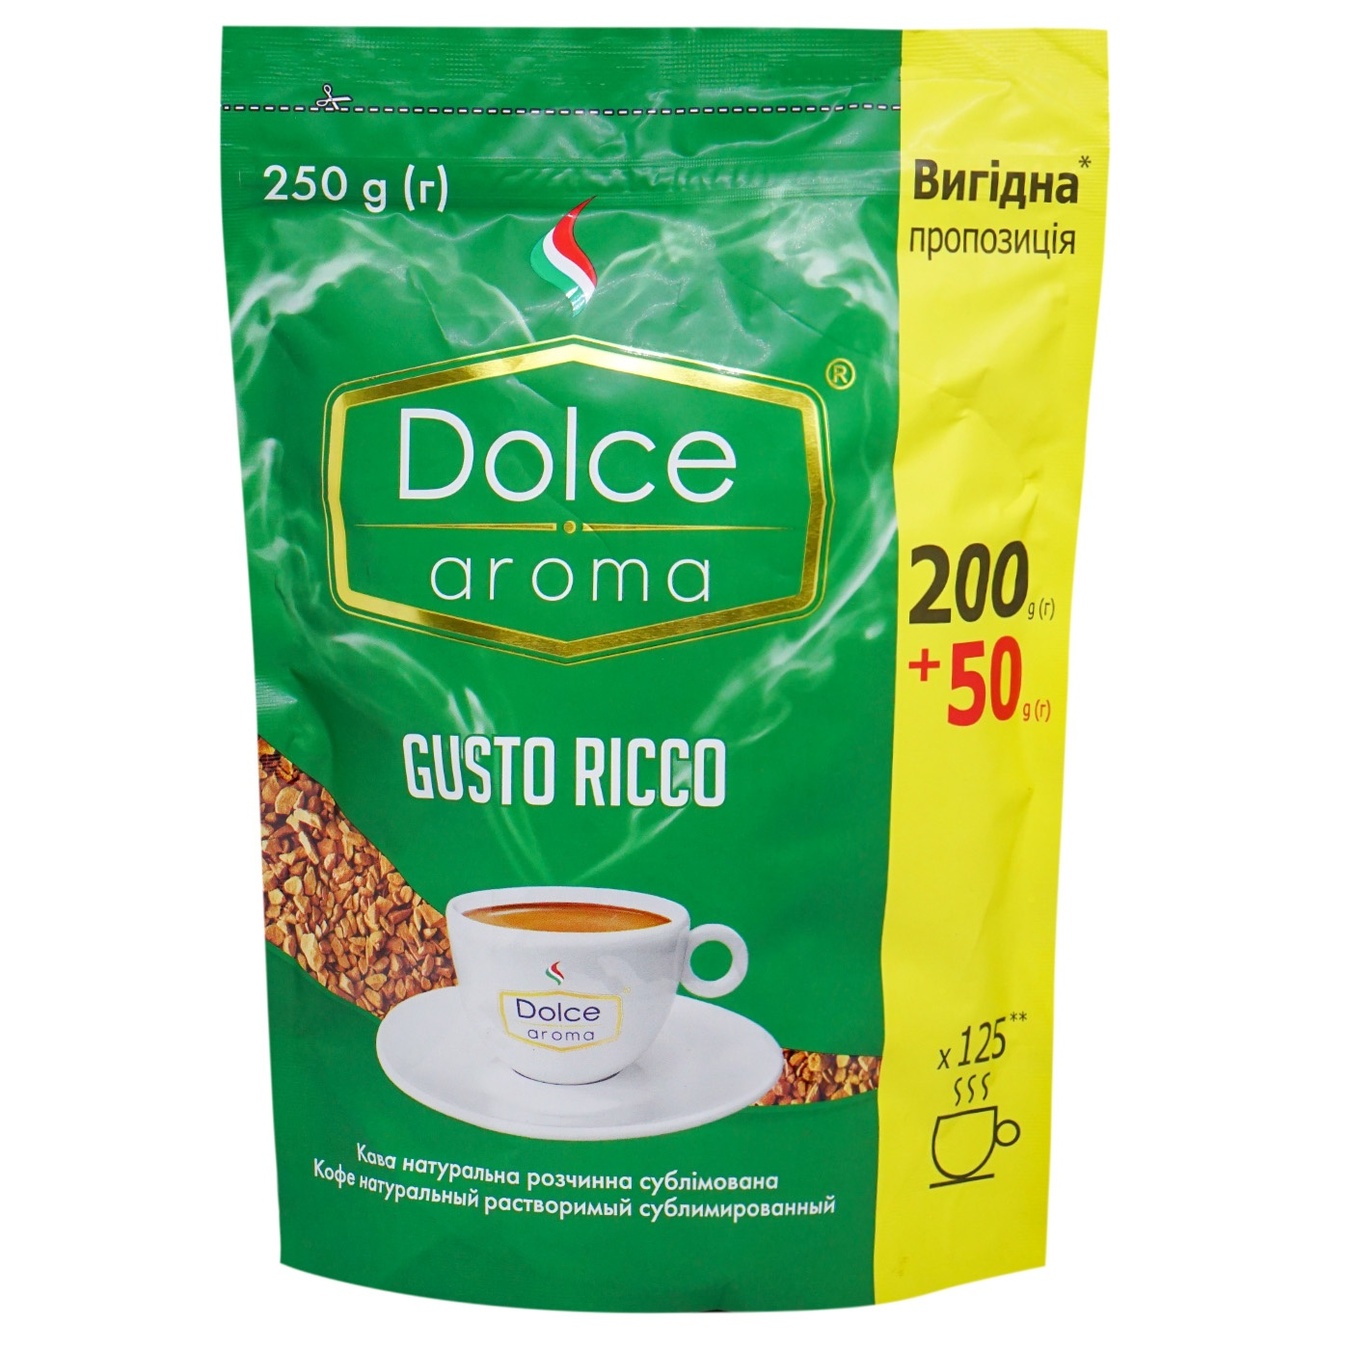 Dolce Aroma Gusto Ricco natural soluble sublimated coffee 250 g